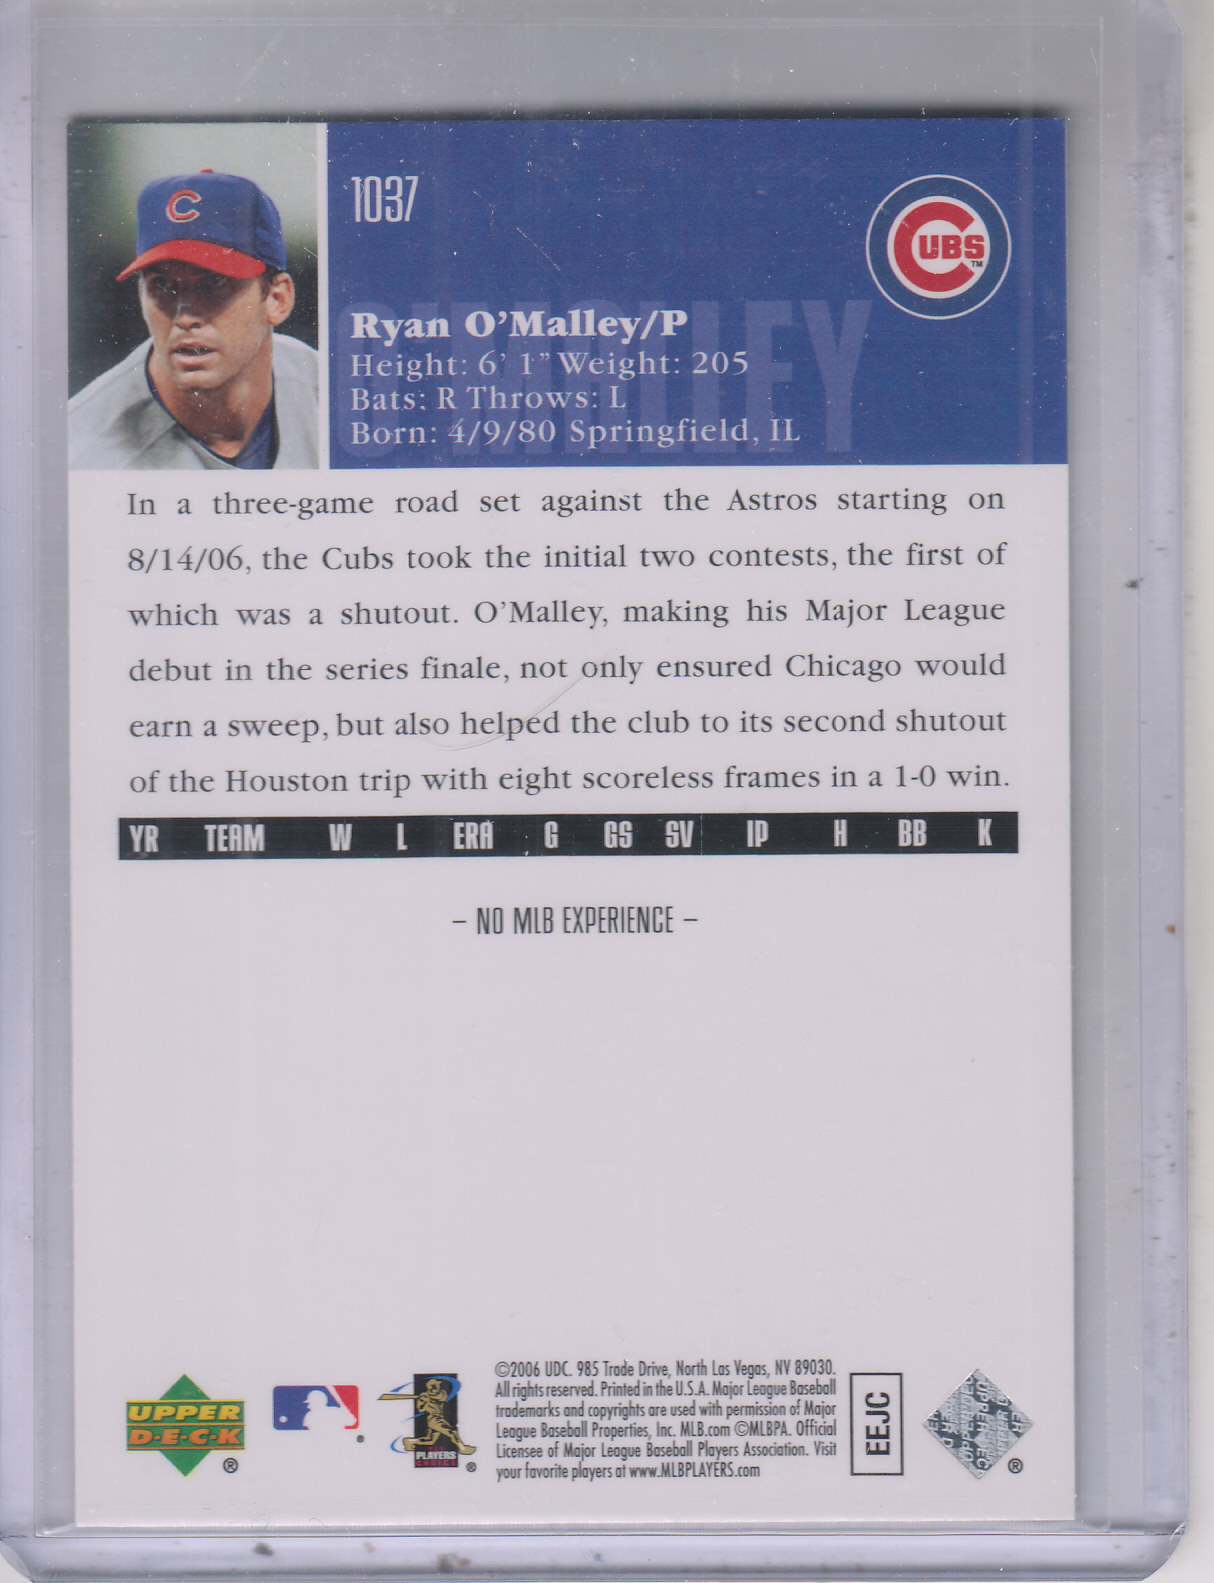 2006 Upper Deck #1037 Ryan O'Malley SP RC back image